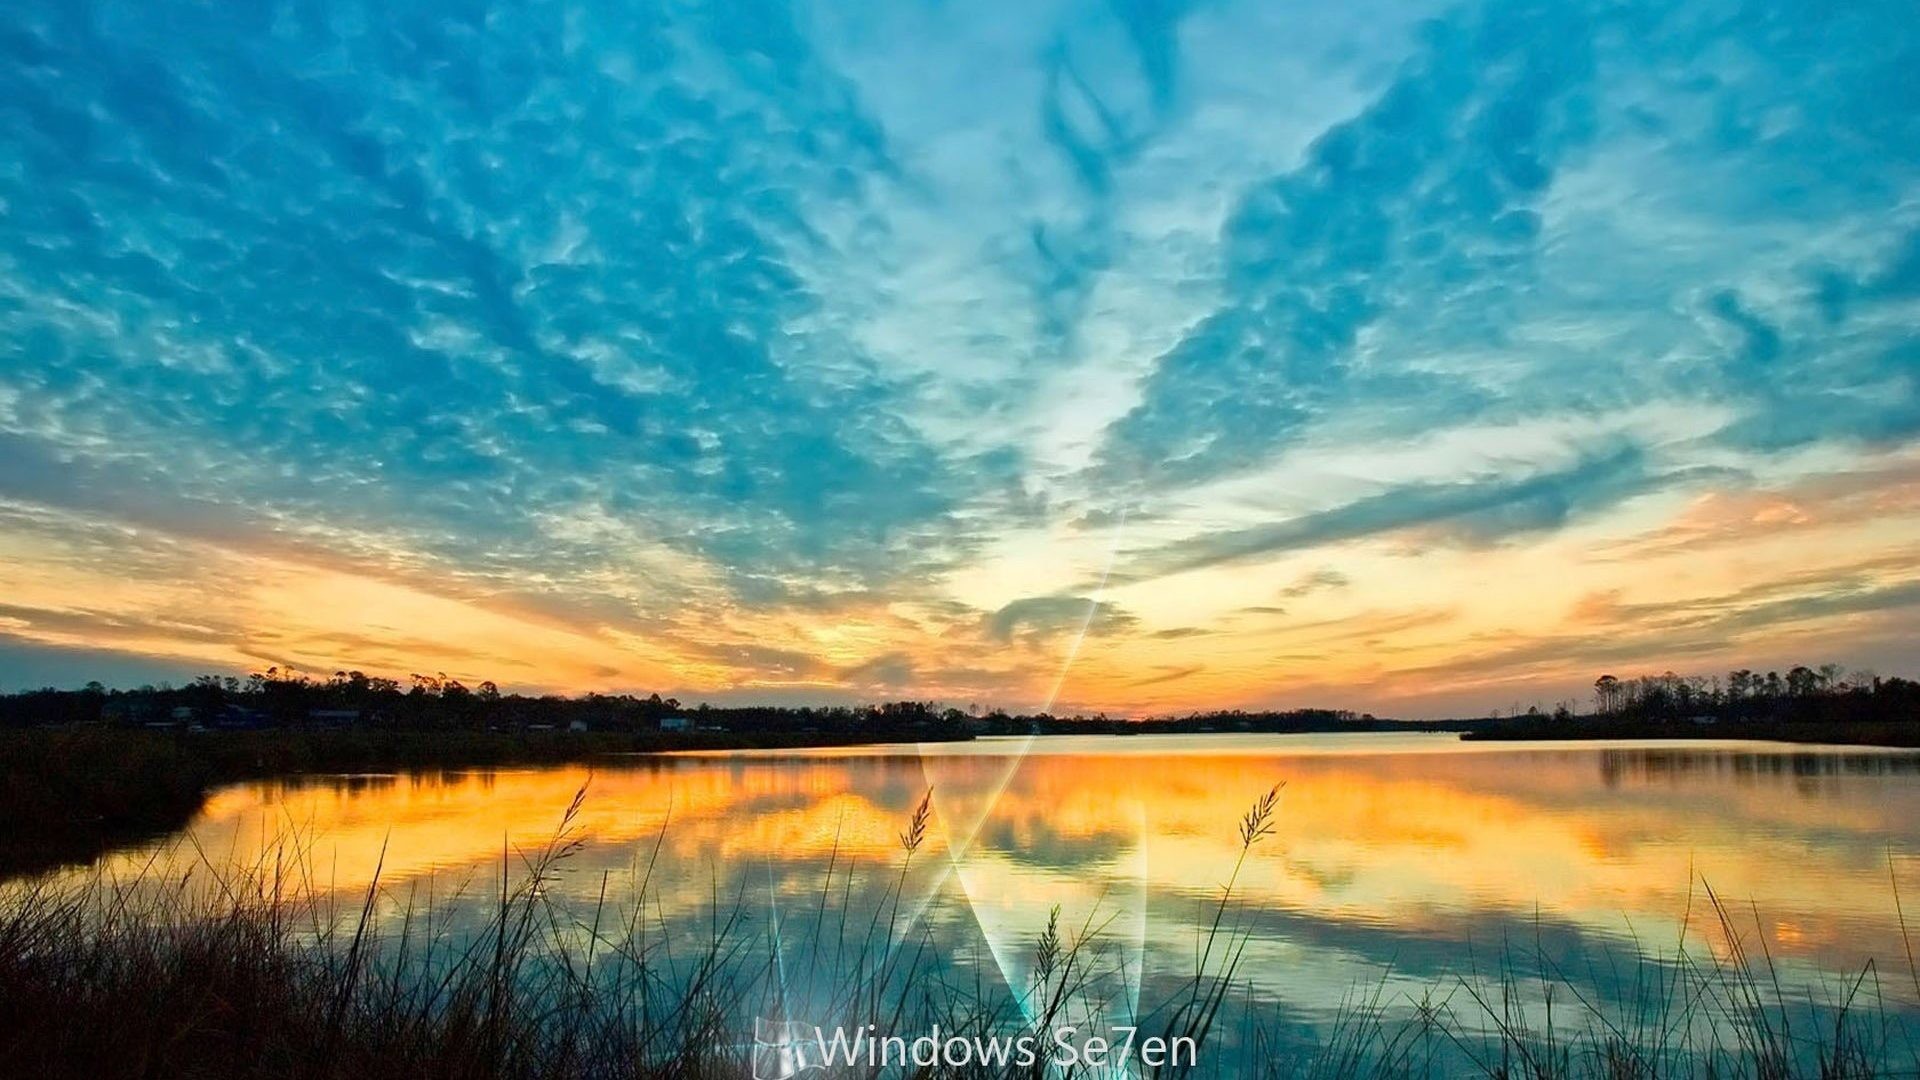 hd wallpaper for laptop full screen,sky,natural landscape,nature,reflection,afterglow